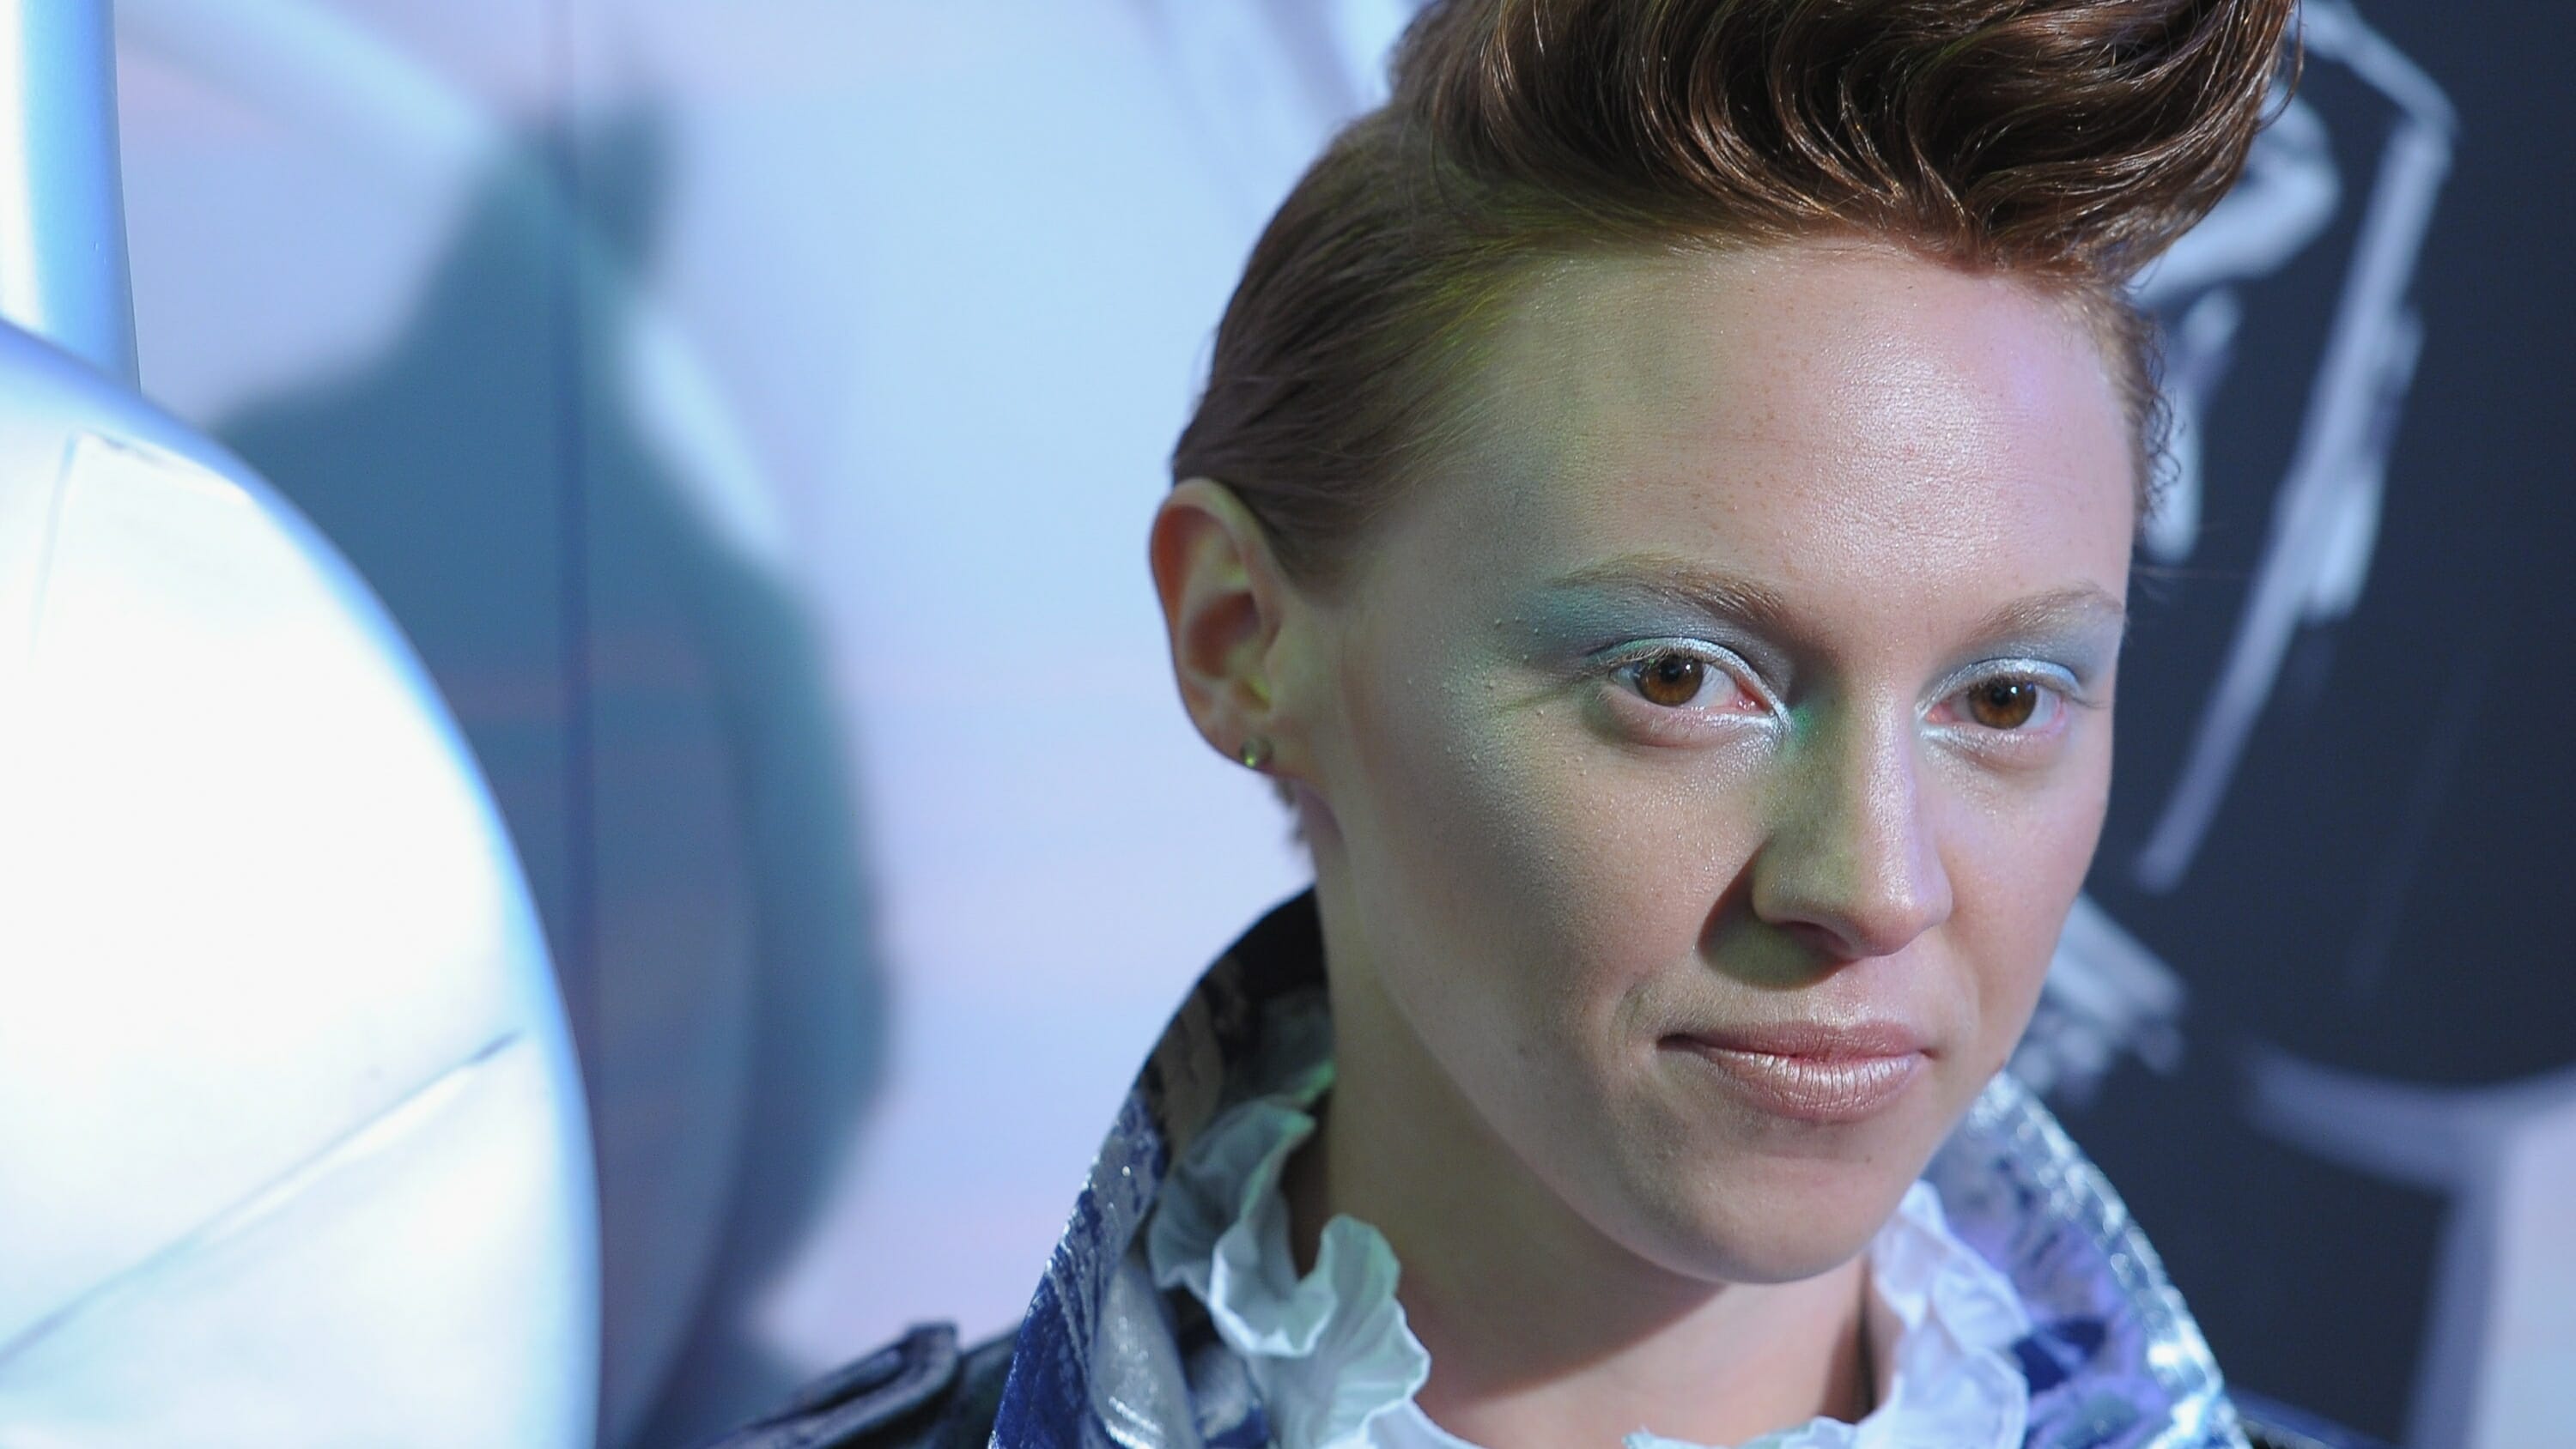 La Roux Responds to Fox Playing “Bulletproof” to Promote Protective Apparel